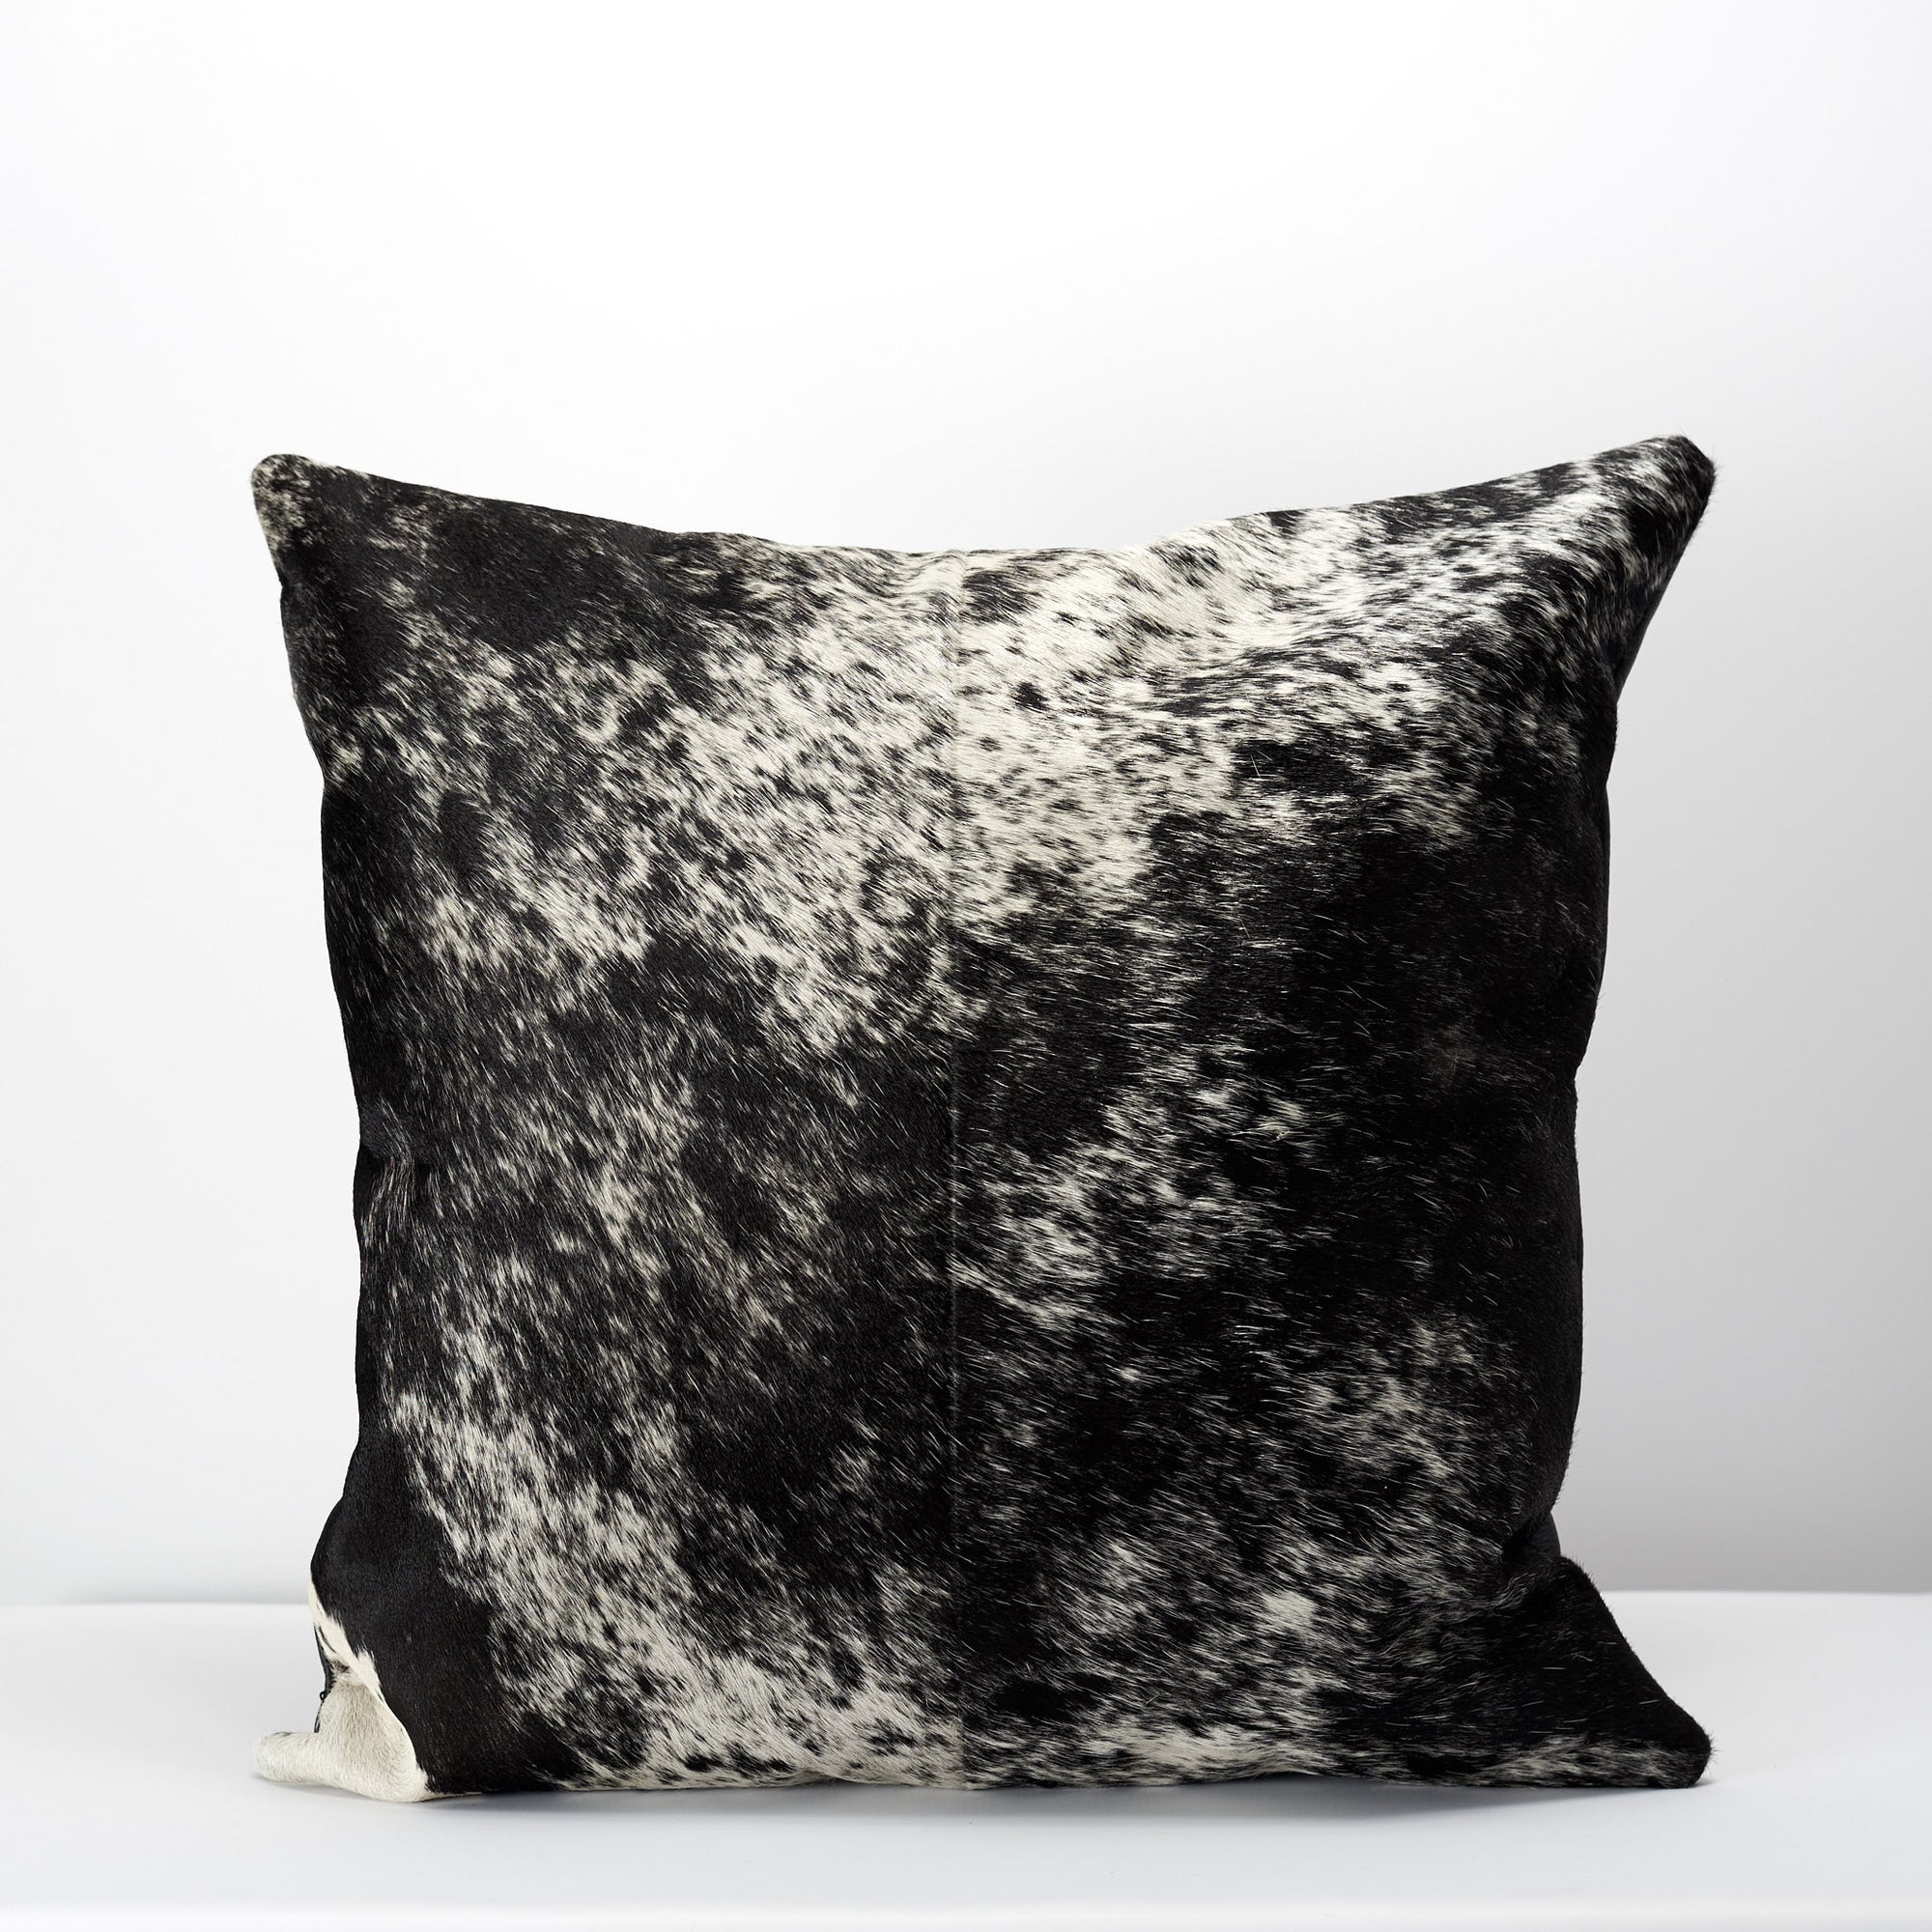 Back patterns from handmade dual leather cowhide cushion